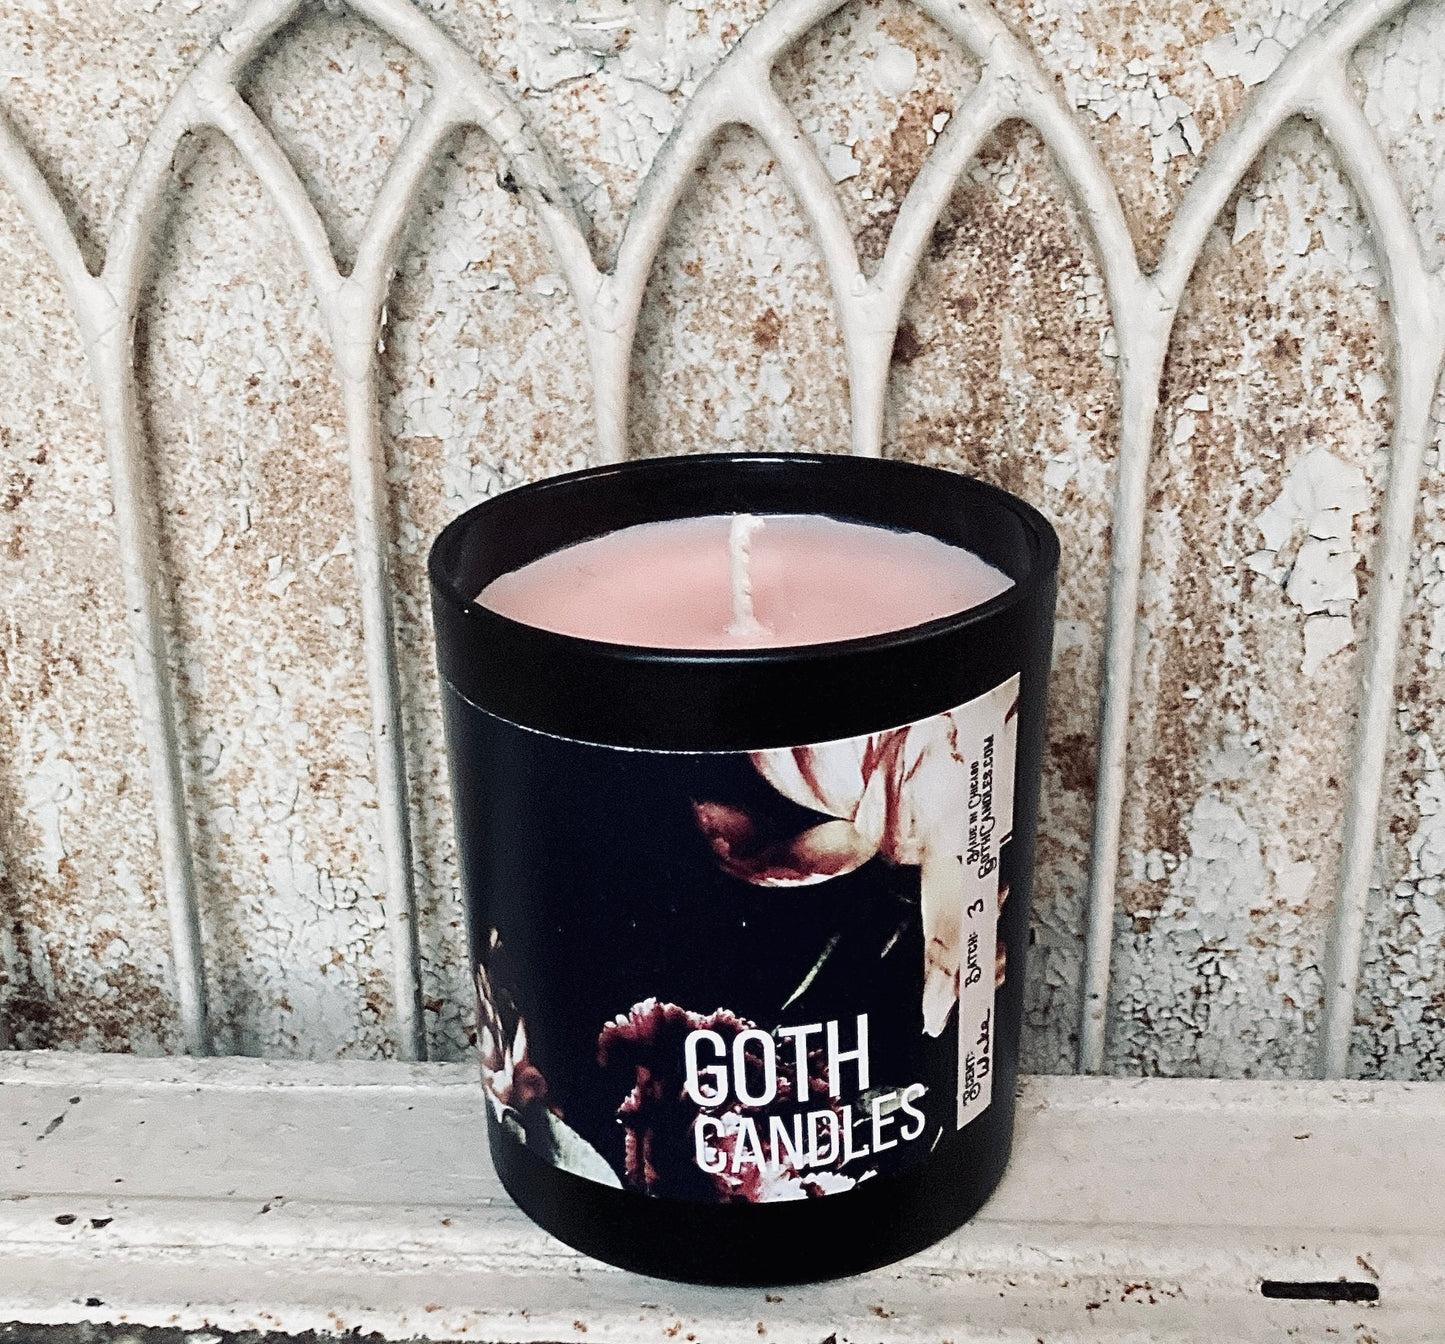 WAKE | Sweet Bouquet Floral Scent | Funeral Parlor Collection | Goth Candles | 10 oz Vessel | Premium Soy Wax | Valentines Day Gift